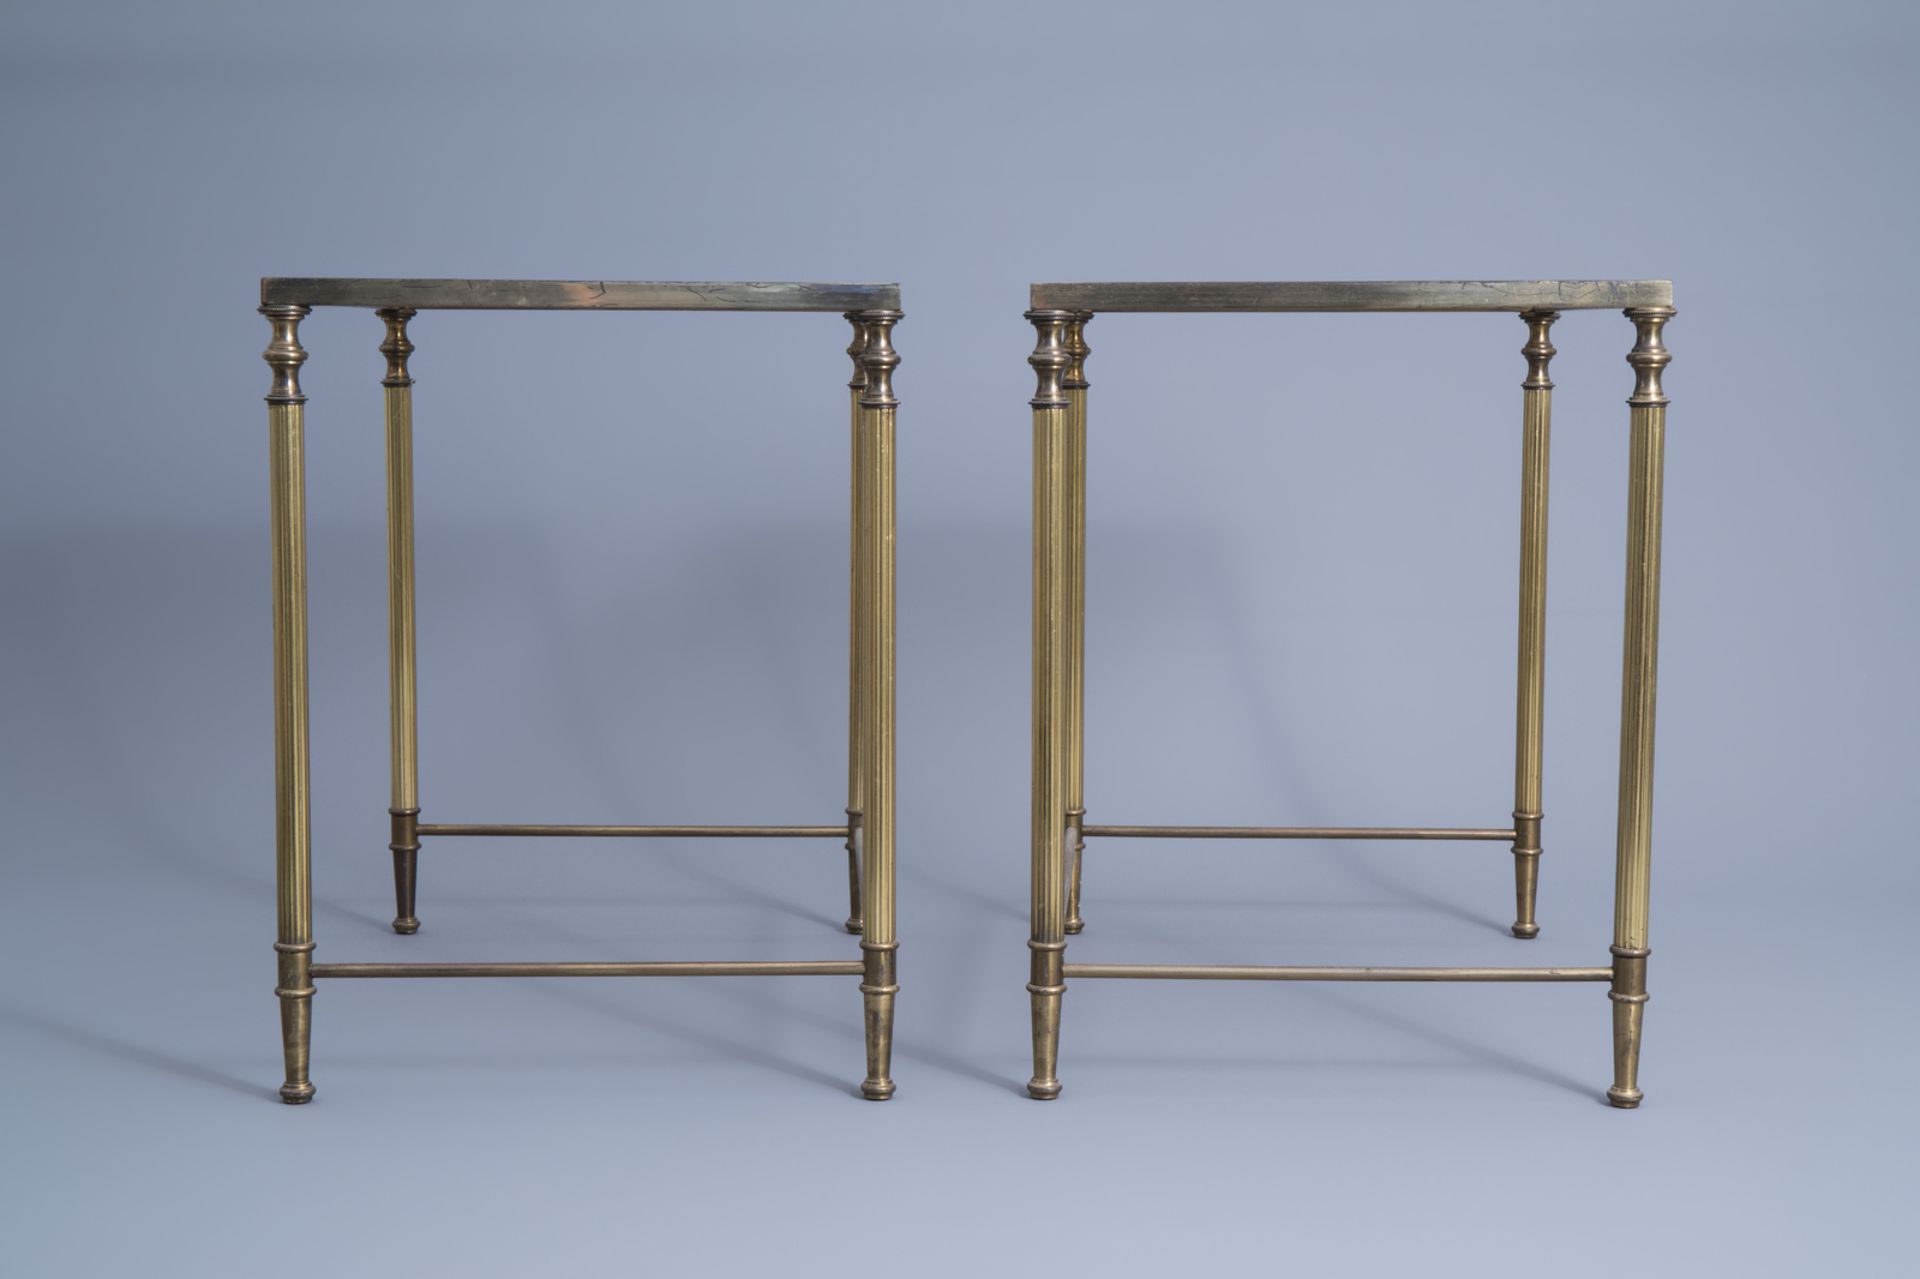 Two sets of three Maison Jansen rectangular gigogne side tables with a glass top, France, 1970's - Image 10 of 19